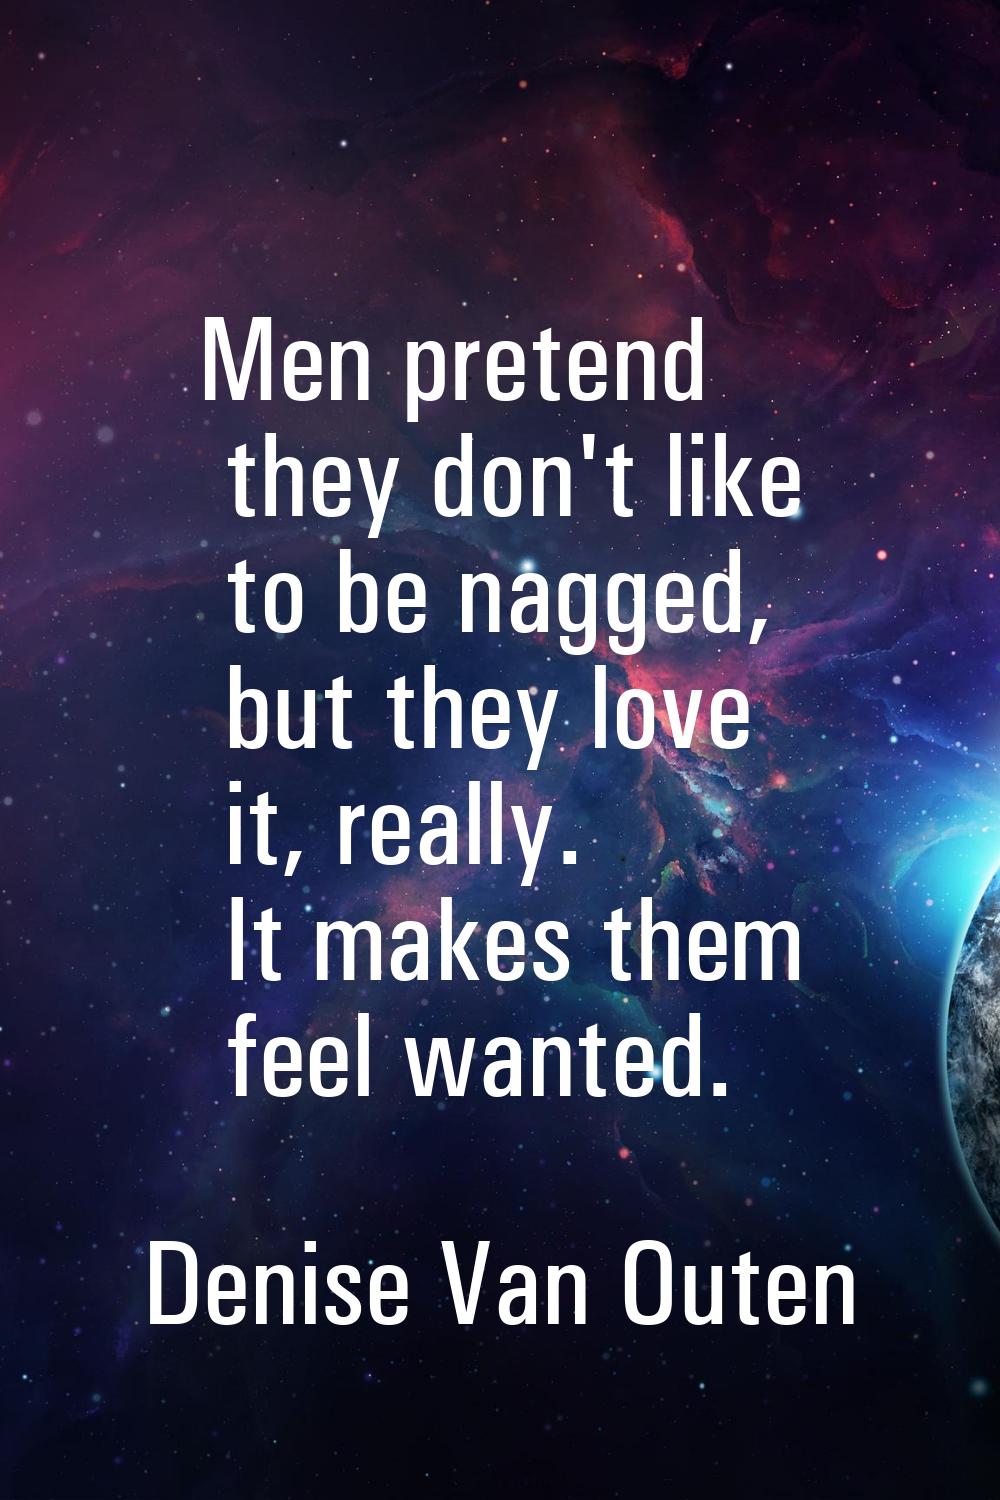 Men pretend they don't like to be nagged, but they love it, really. It makes them feel wanted.